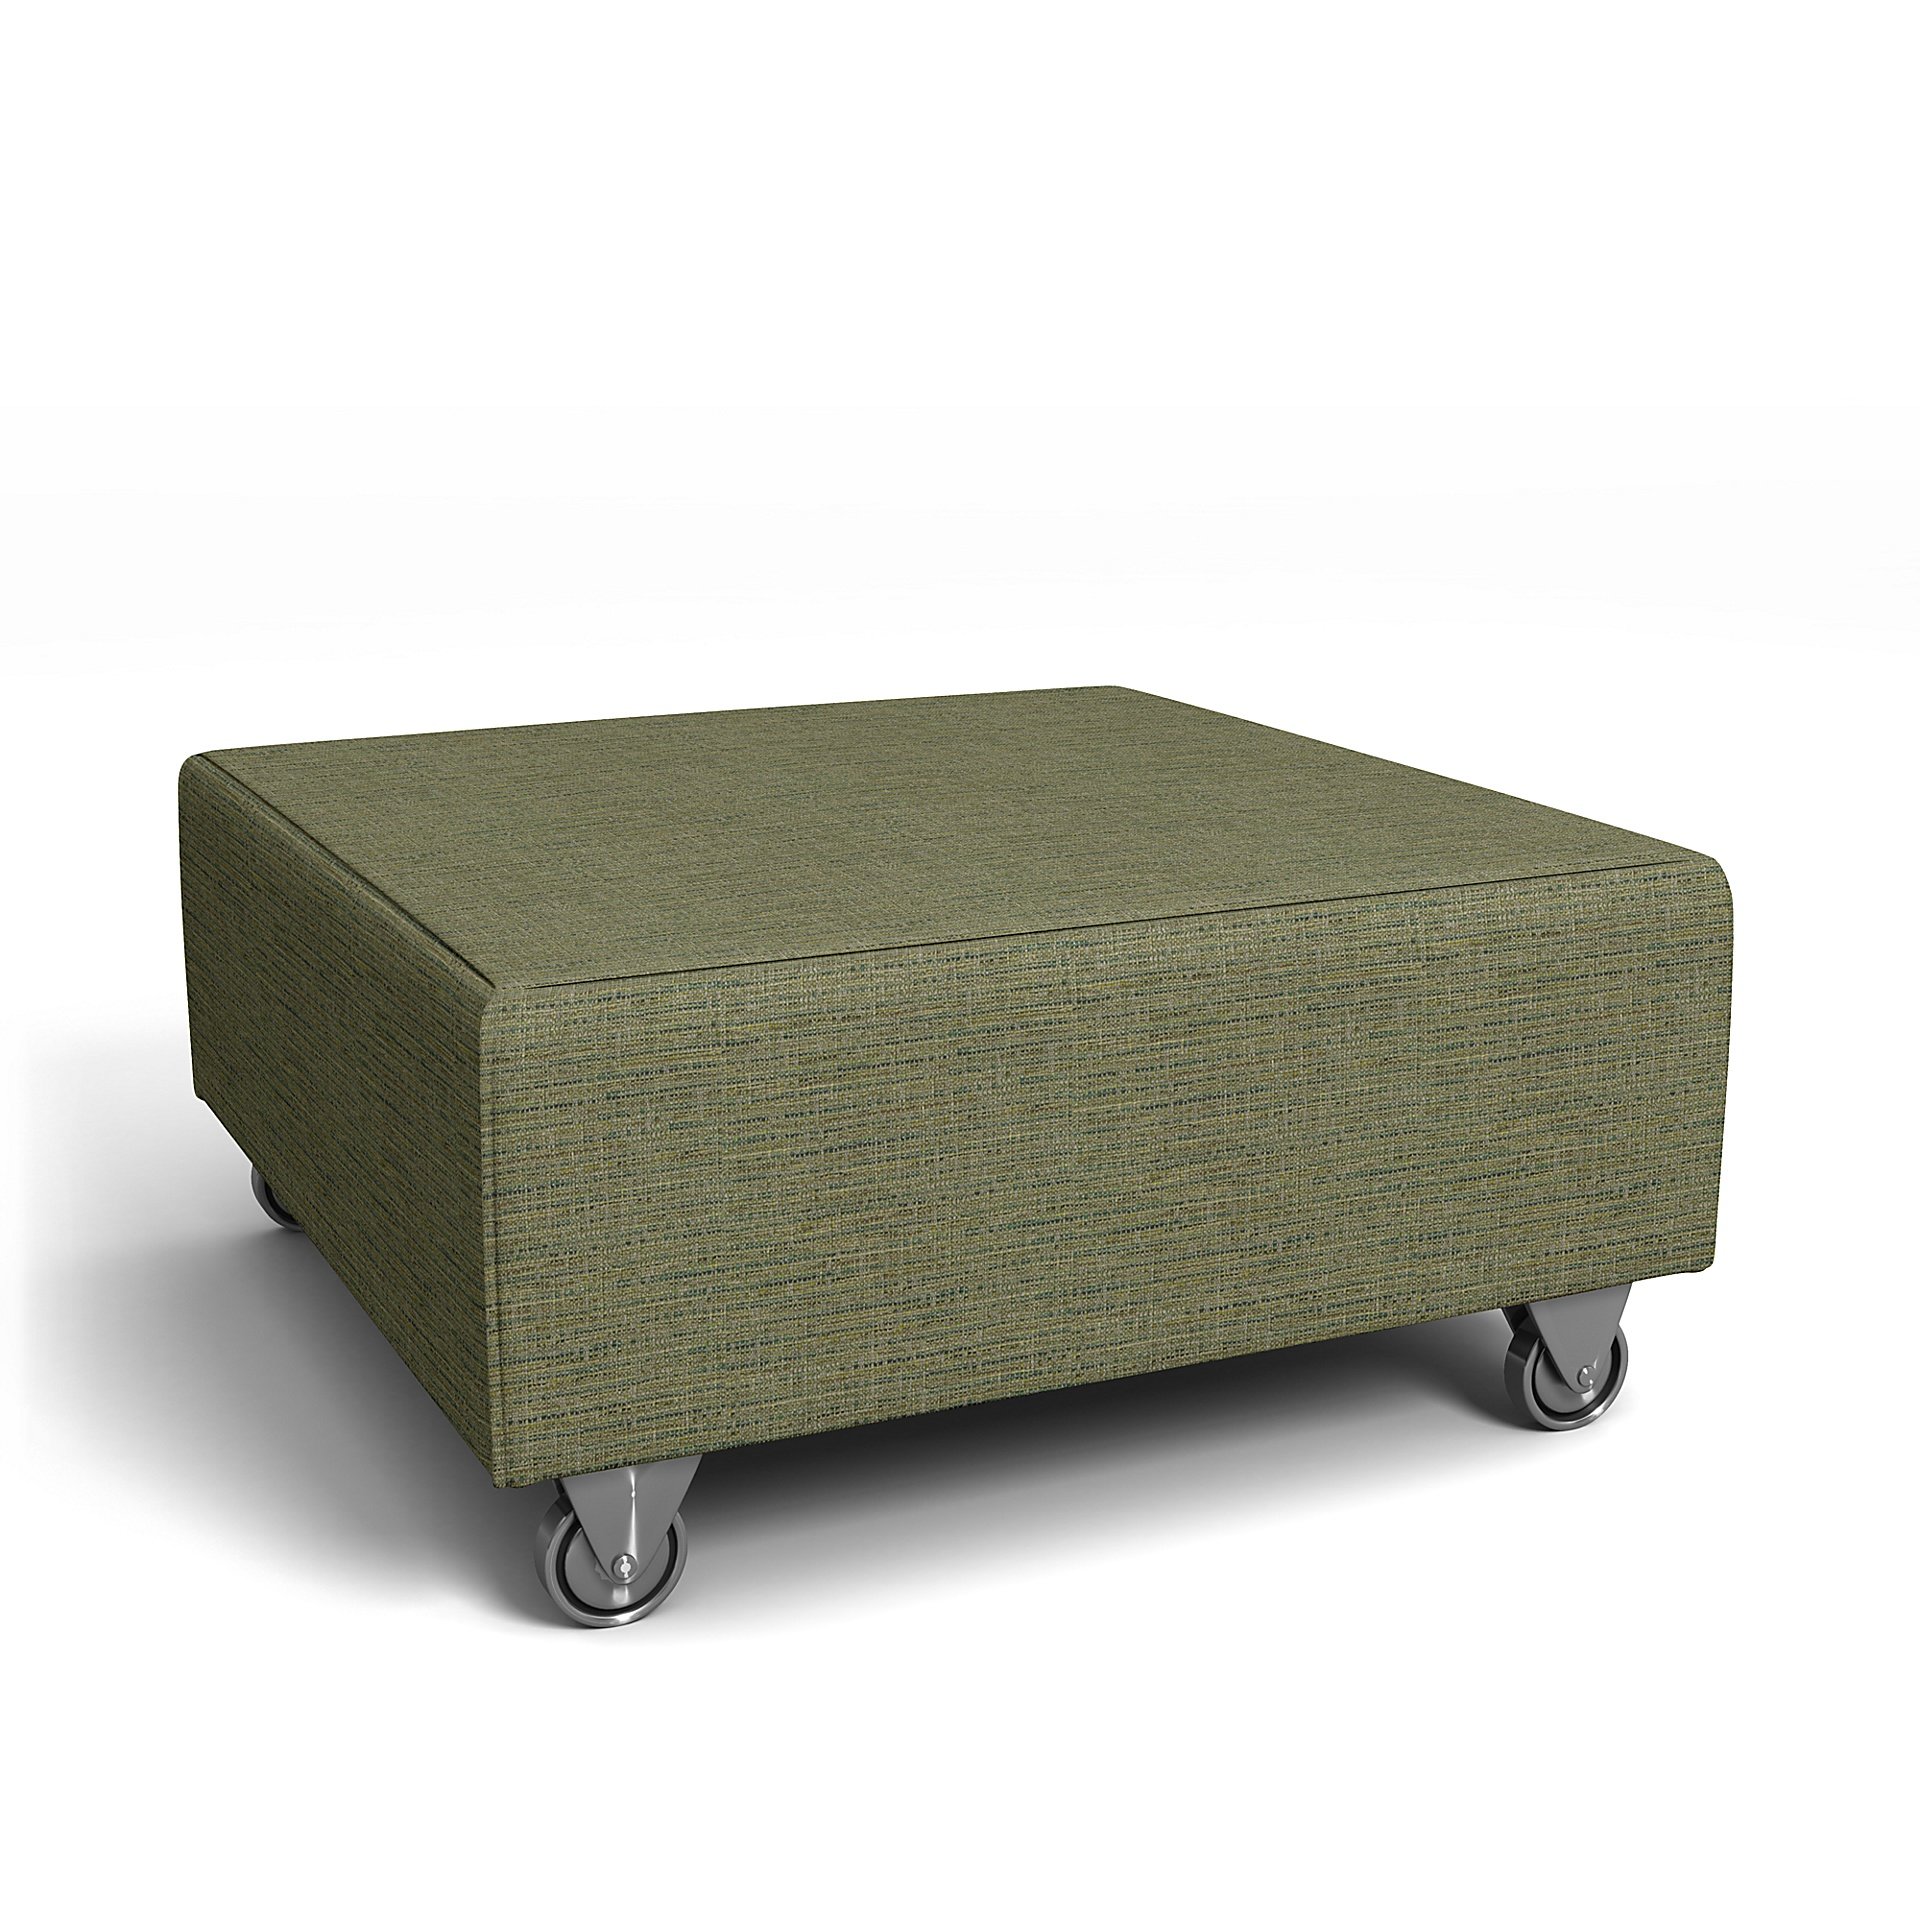 IKEA - Falsterbo Footstool Cover, Meadow Green, Boucle & Texture - Bemz